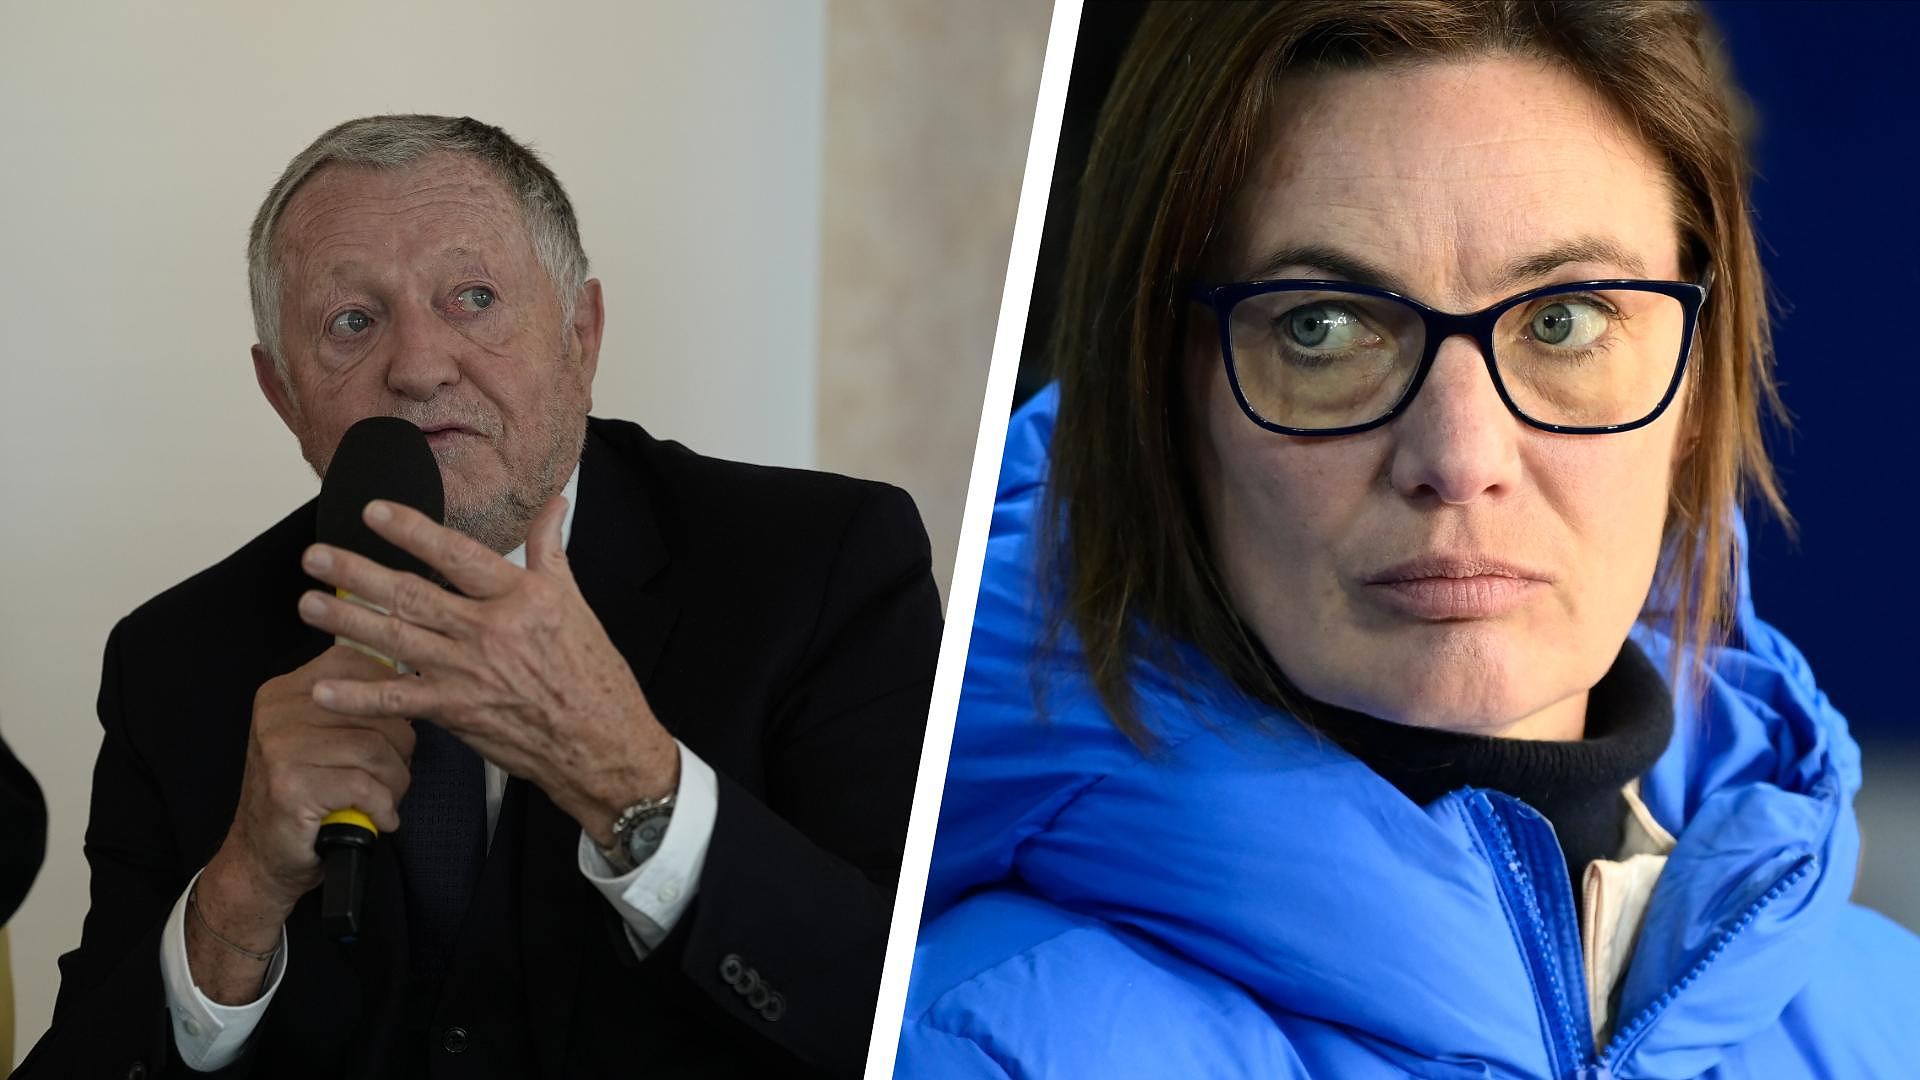 “A situation for which she is solely responsible”: Aulas’ response to Deacon